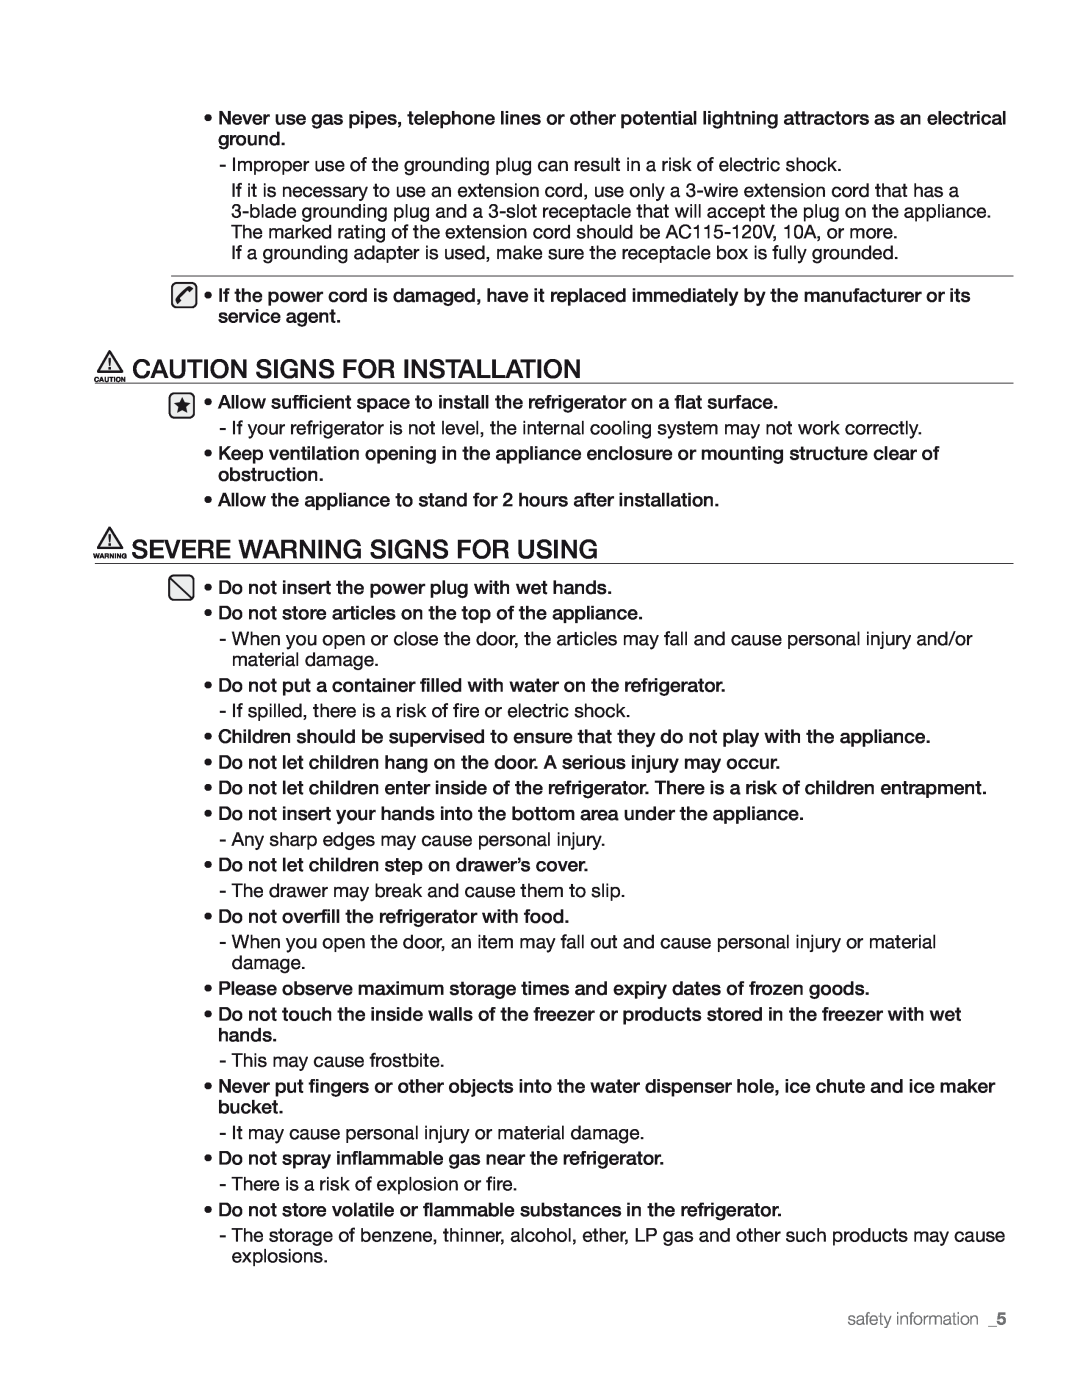 Samsung DA68-01890M user manual Caution Caution Signs For Installation, Warning Severe Warning Signs For Using 